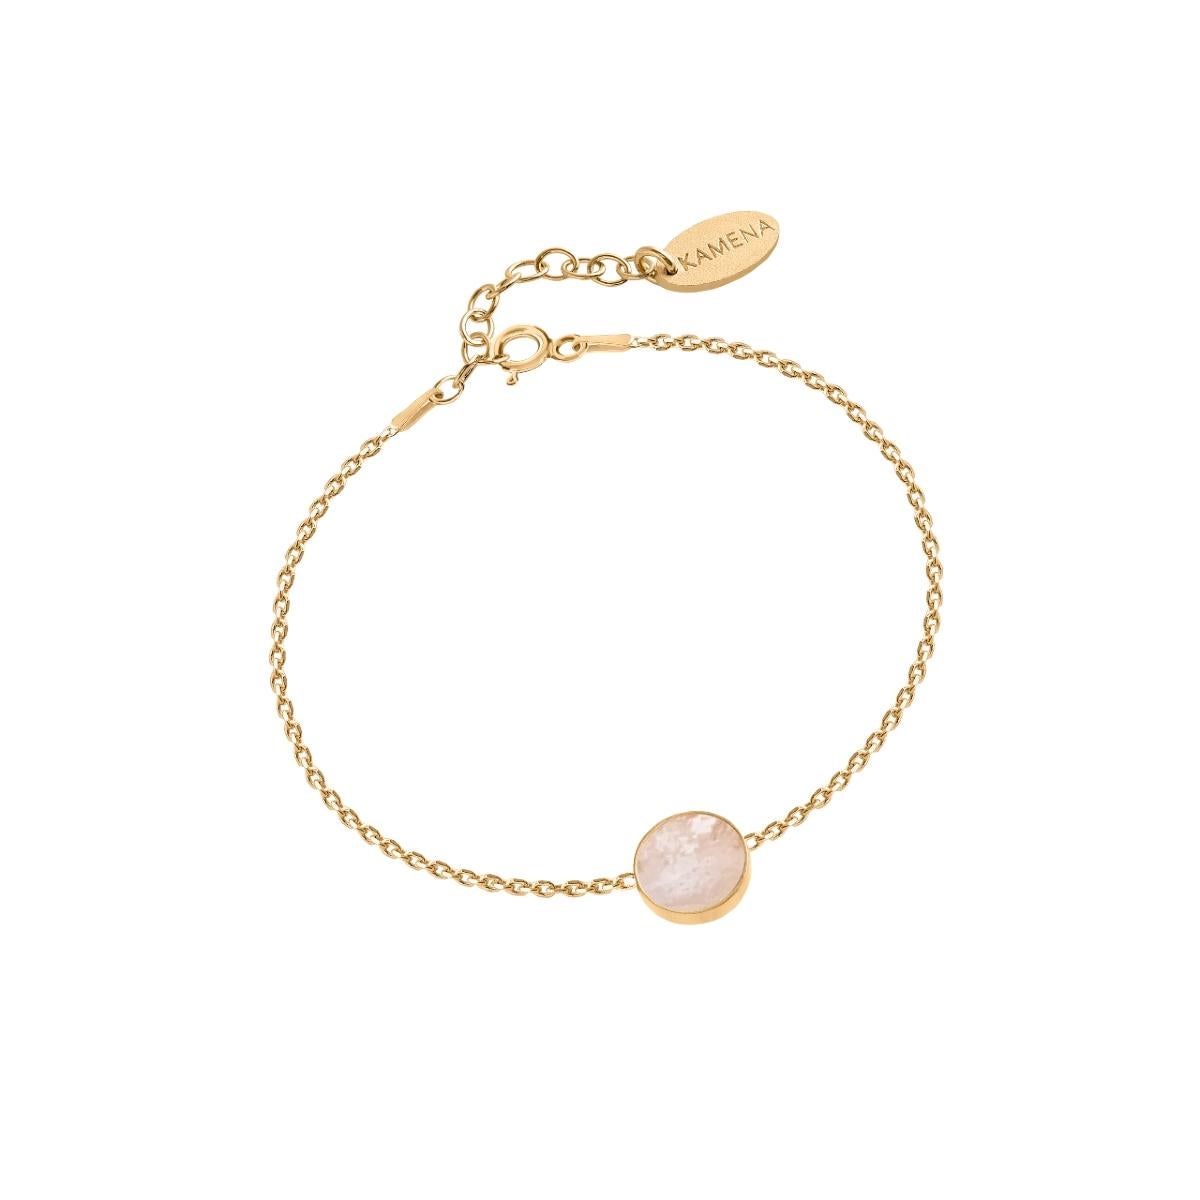 This bracelet with a white stone on a delicate gold chain will be a beautiful adornment for your wrist. Its minimalist design means you can wear it with practically any outfit. It will be perfect for both elegant outings and meetings with